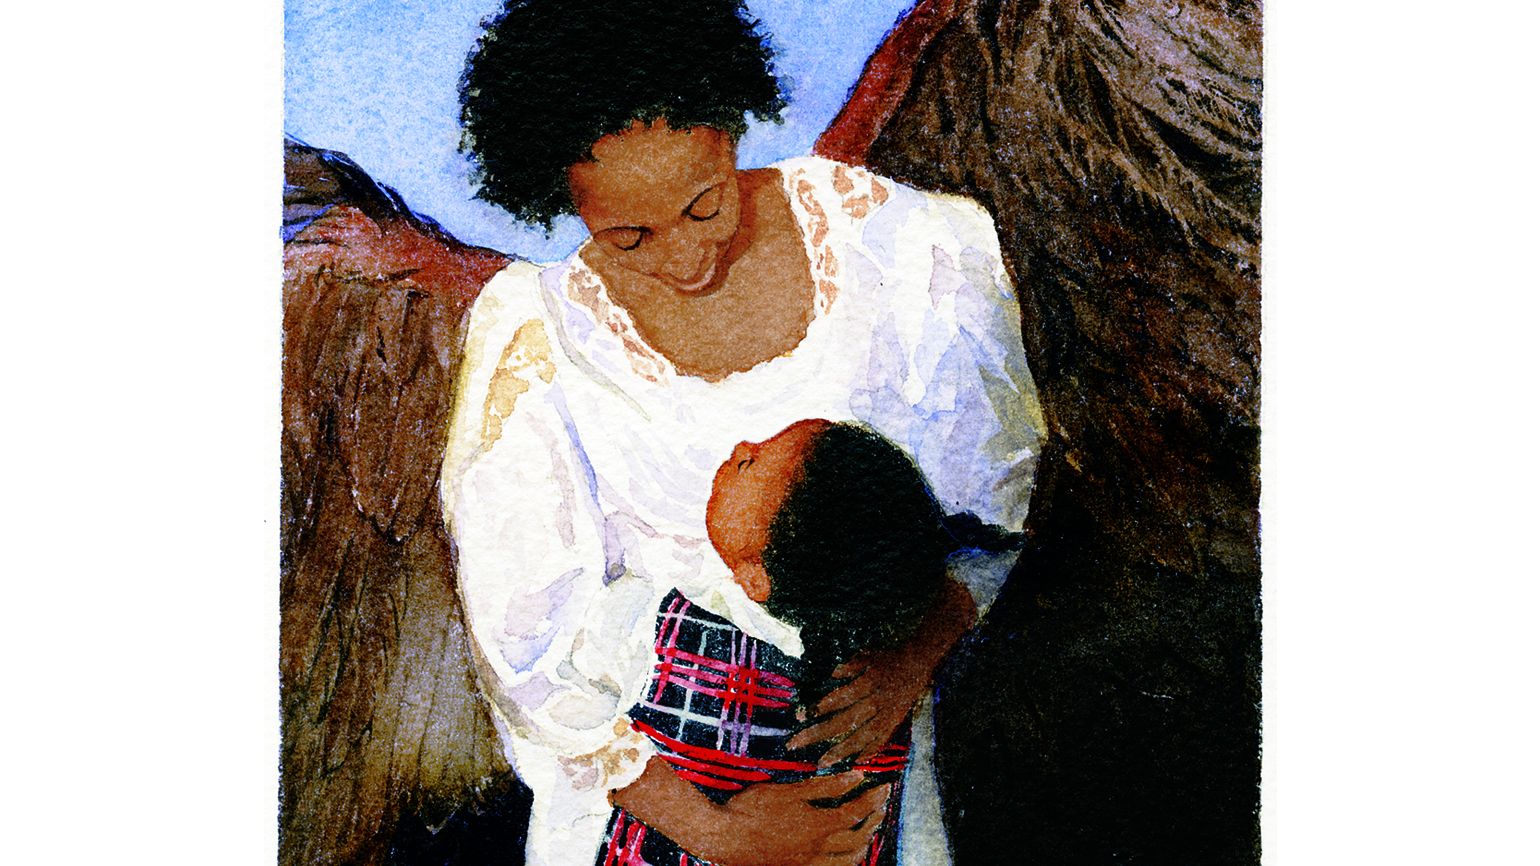 An artist's rendering of a guardian angel hugging a smiling child